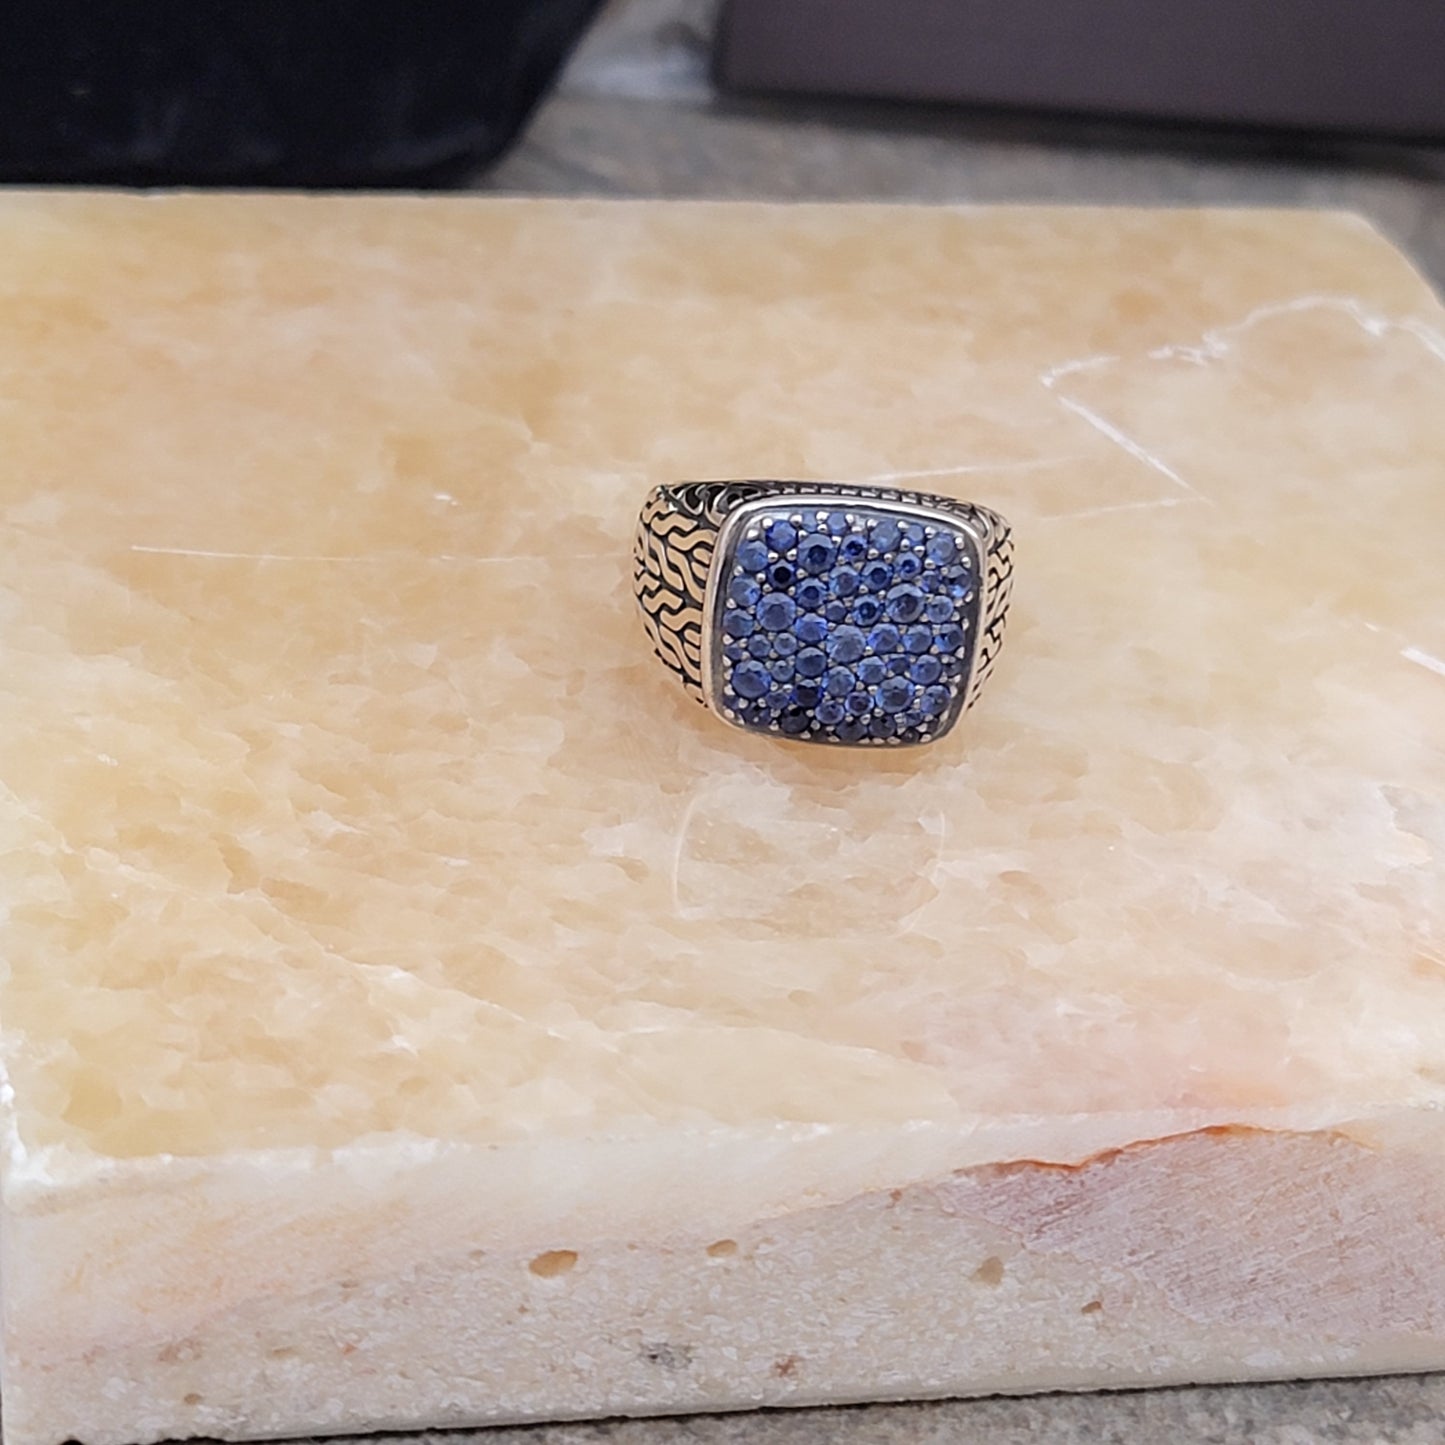 John Hardy Men's Sterling Silver Blue Sapphire Signet Ring, Retail $1550 - SOLD OUT!